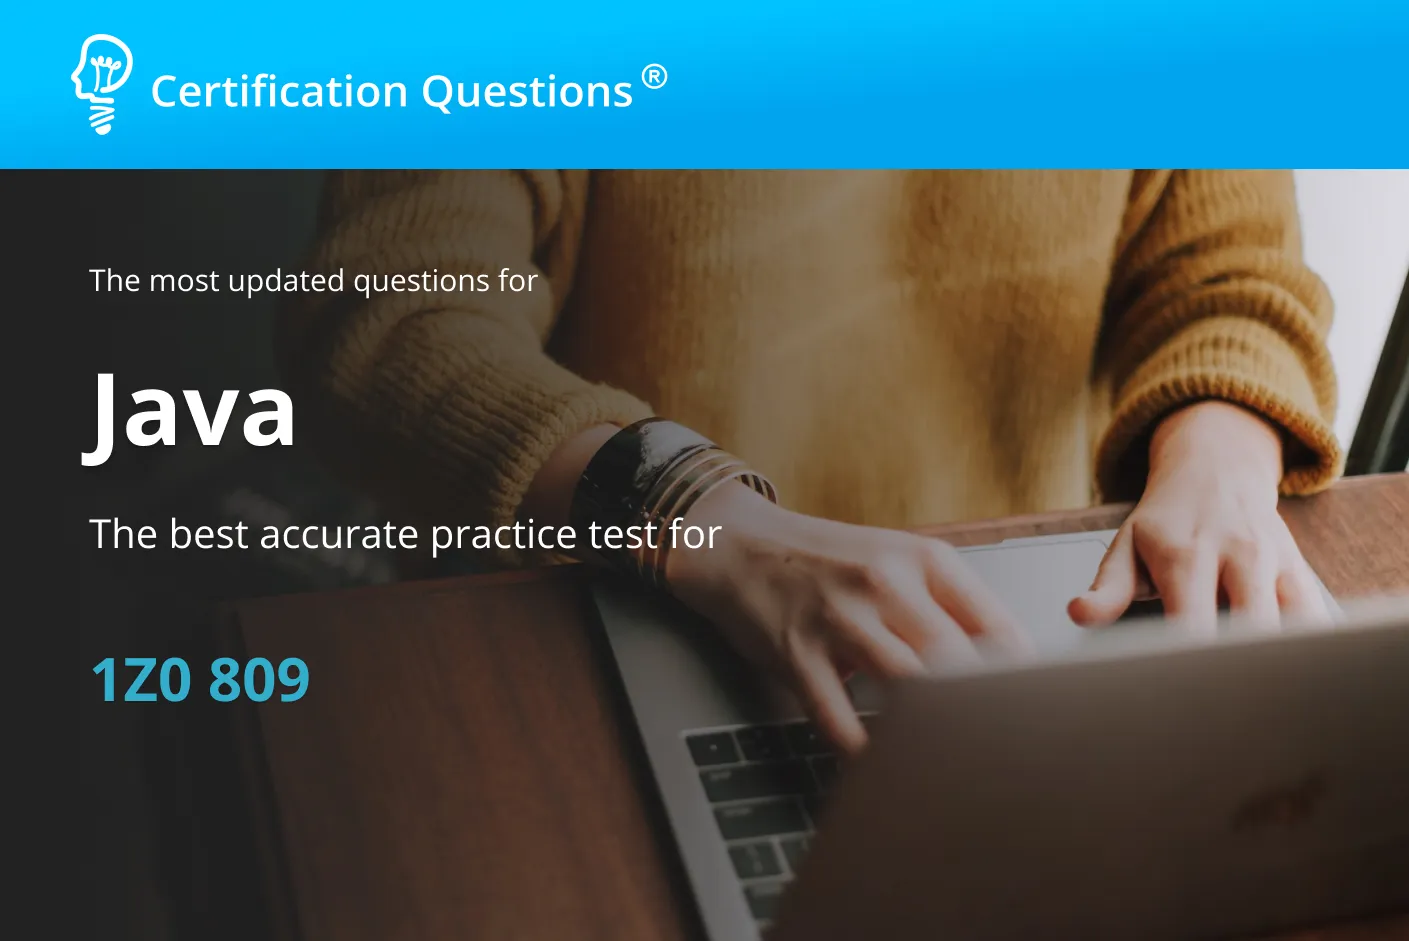 Here is the image for the 1z0 809 exam questions in the United States of America